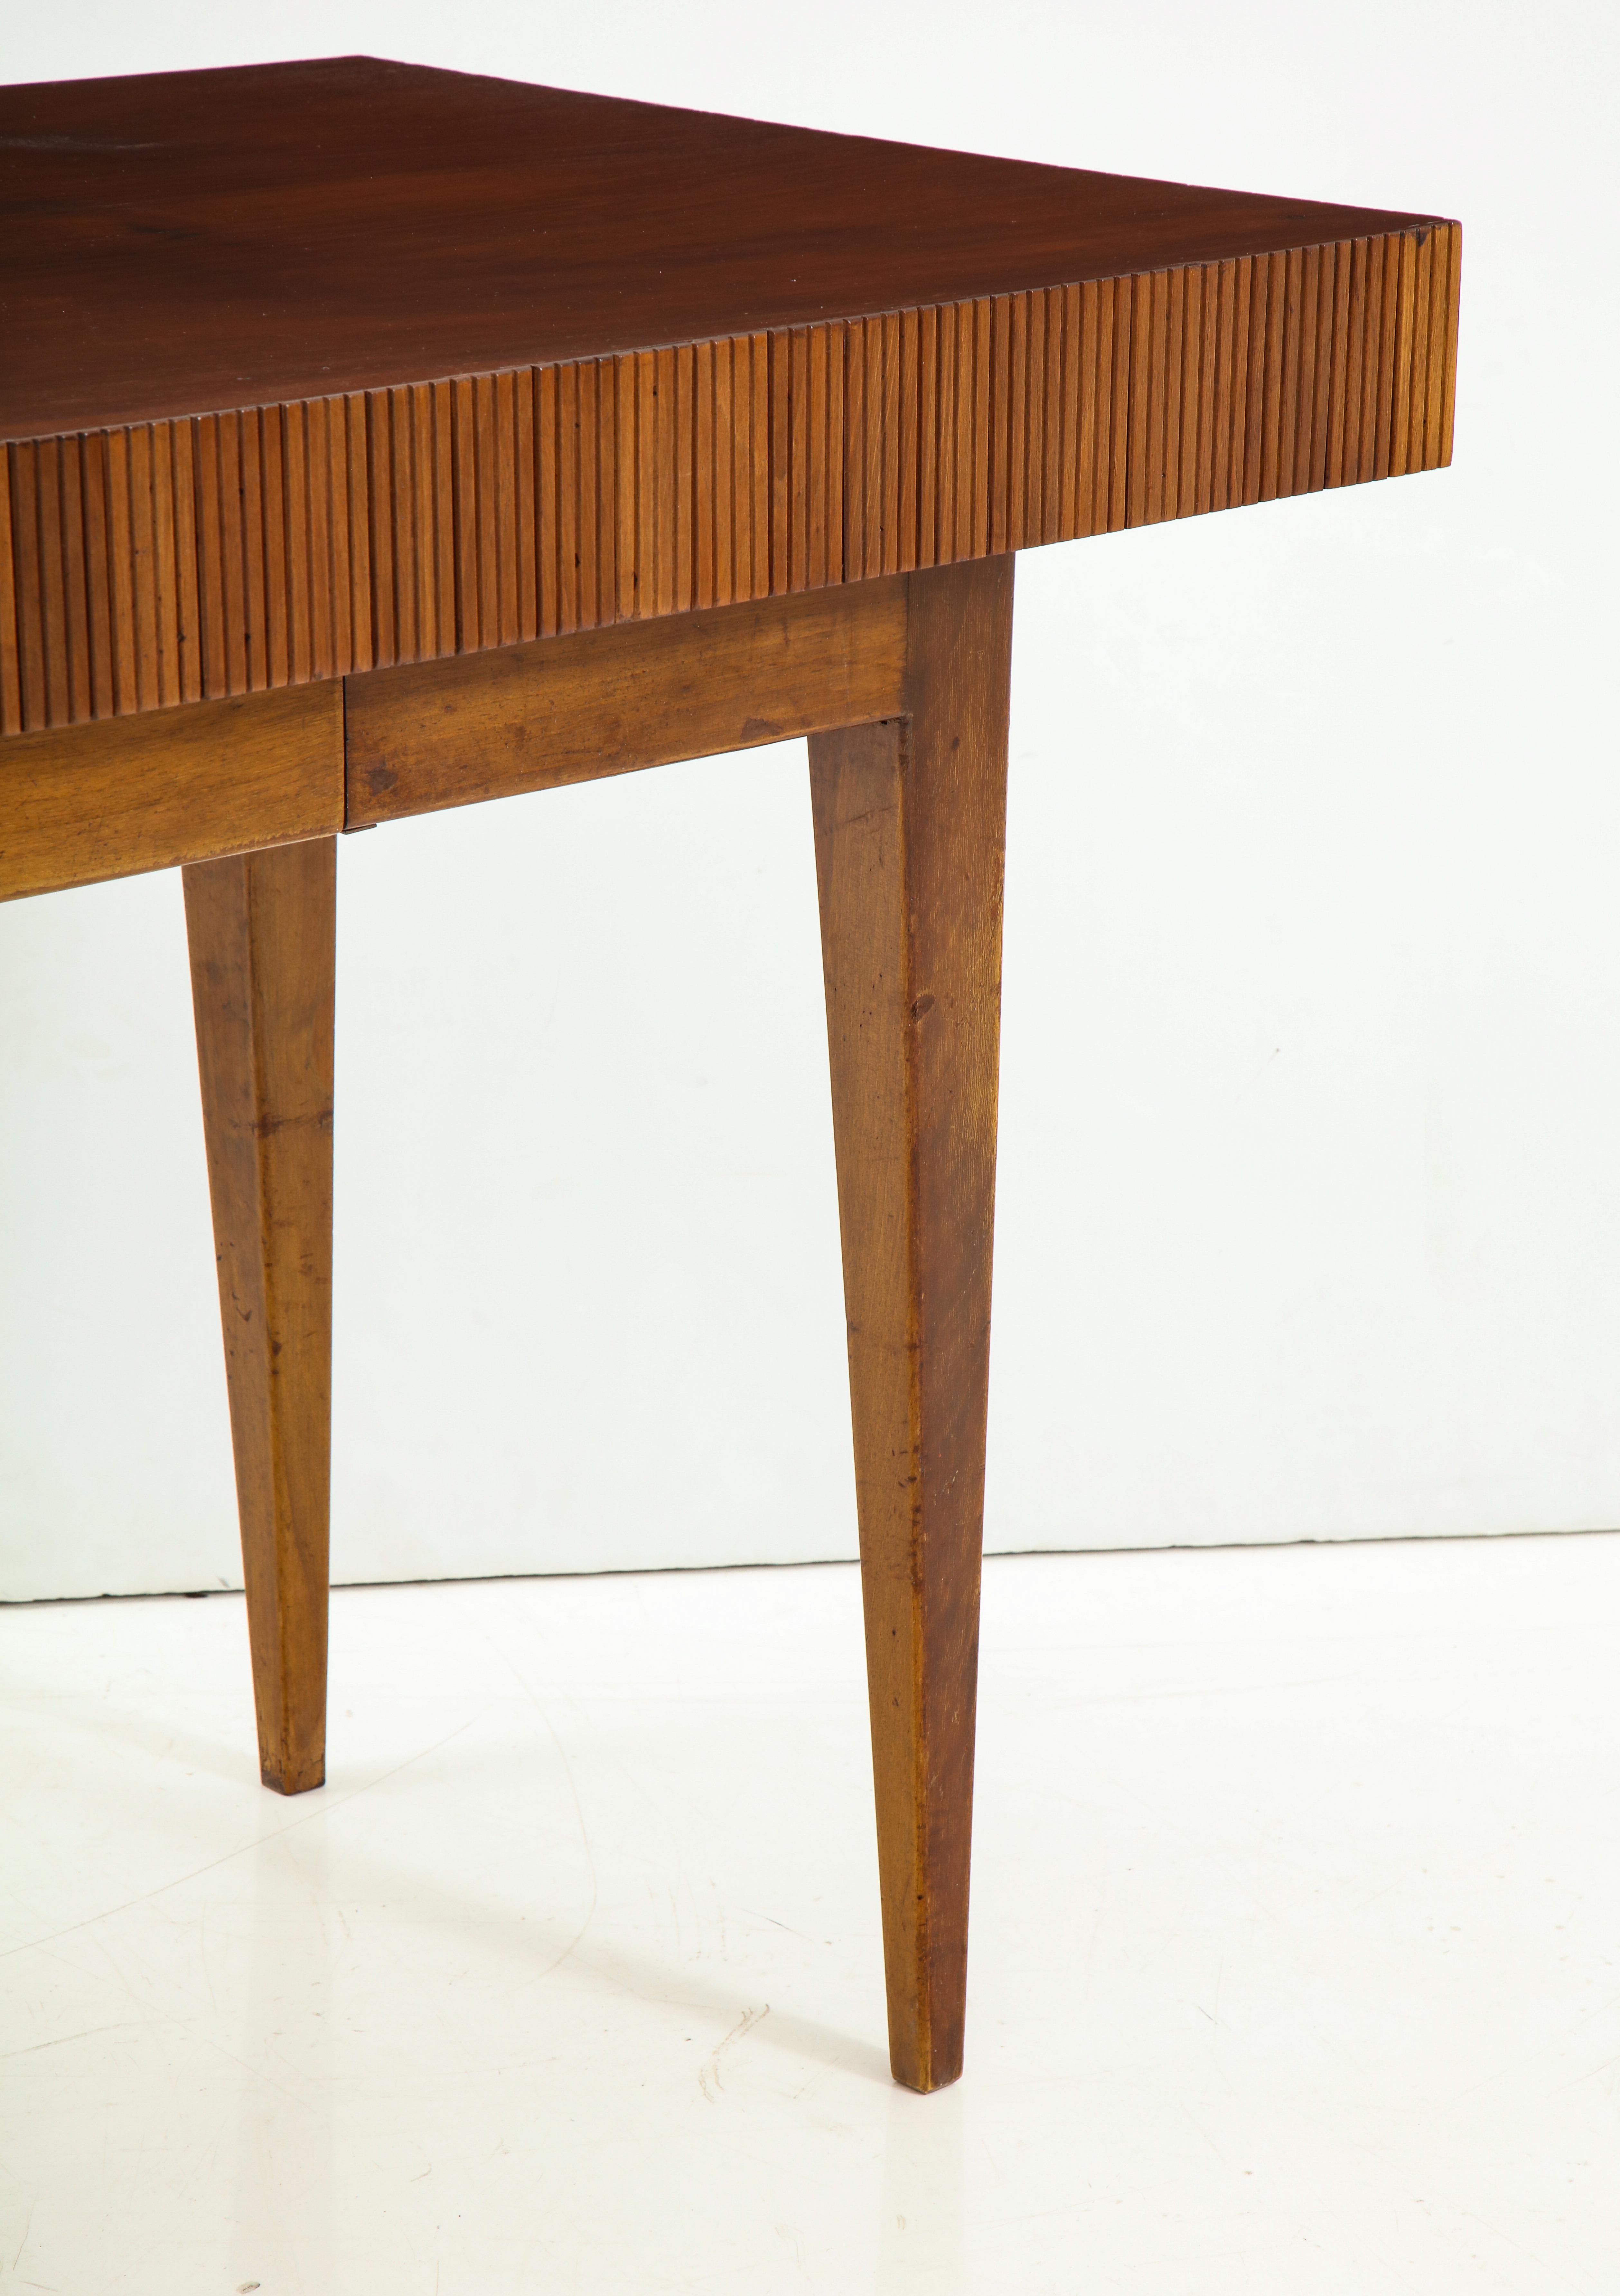 Italian Walnut Table with Single Drawer and Tapered Legs, Style of Gio Ponti (Mitte des 20. Jahrhunderts)